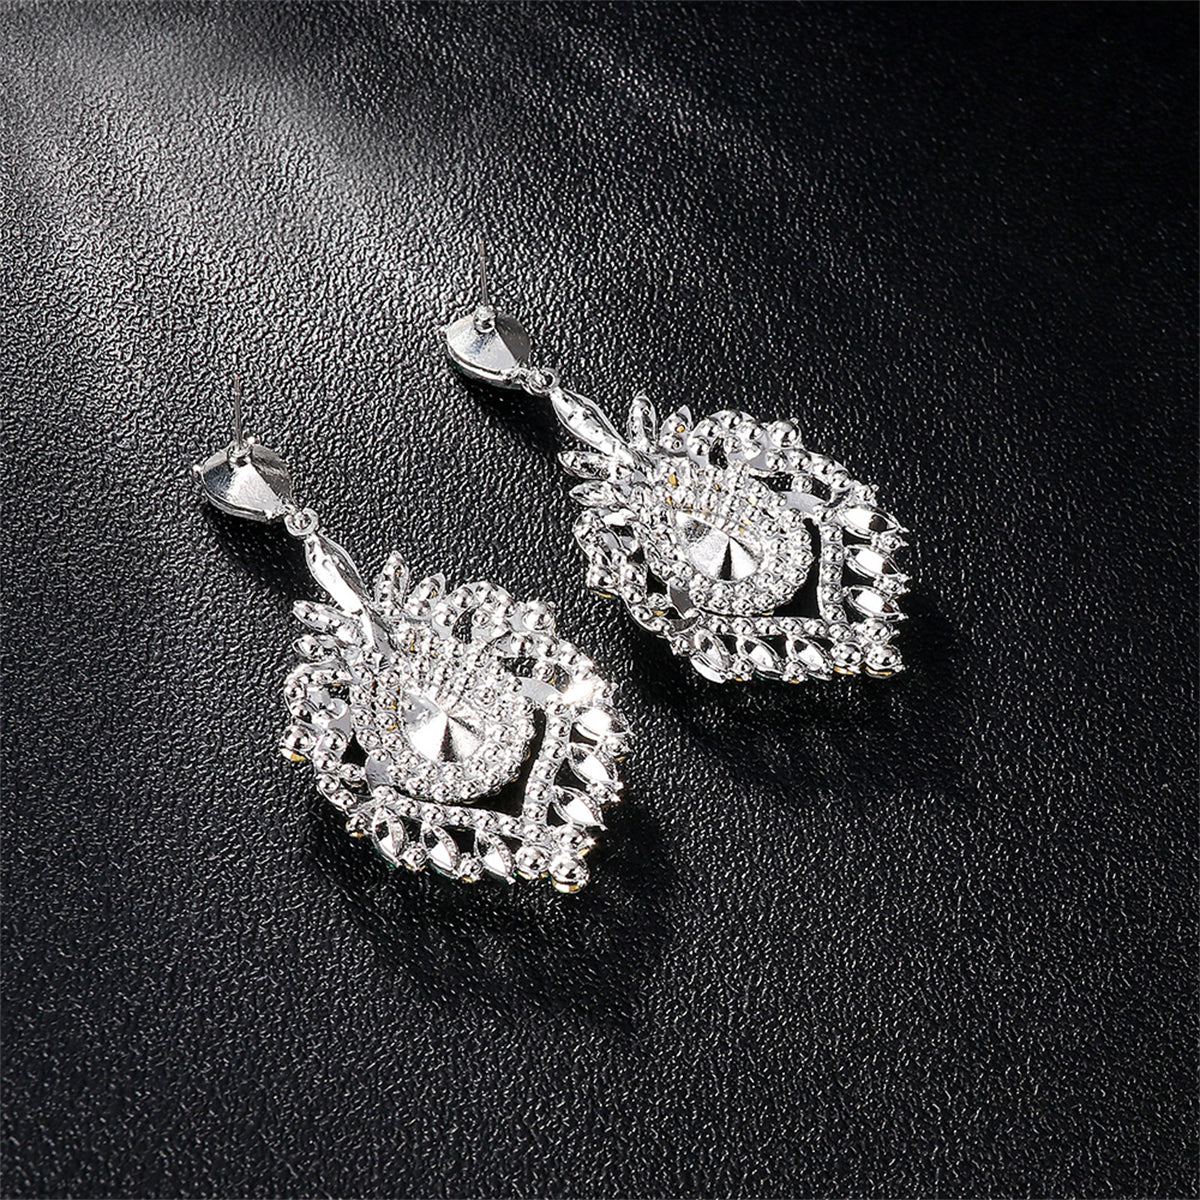 Crystal & Cubic Zirconia Silver-Plated Botanical Drop Earrings